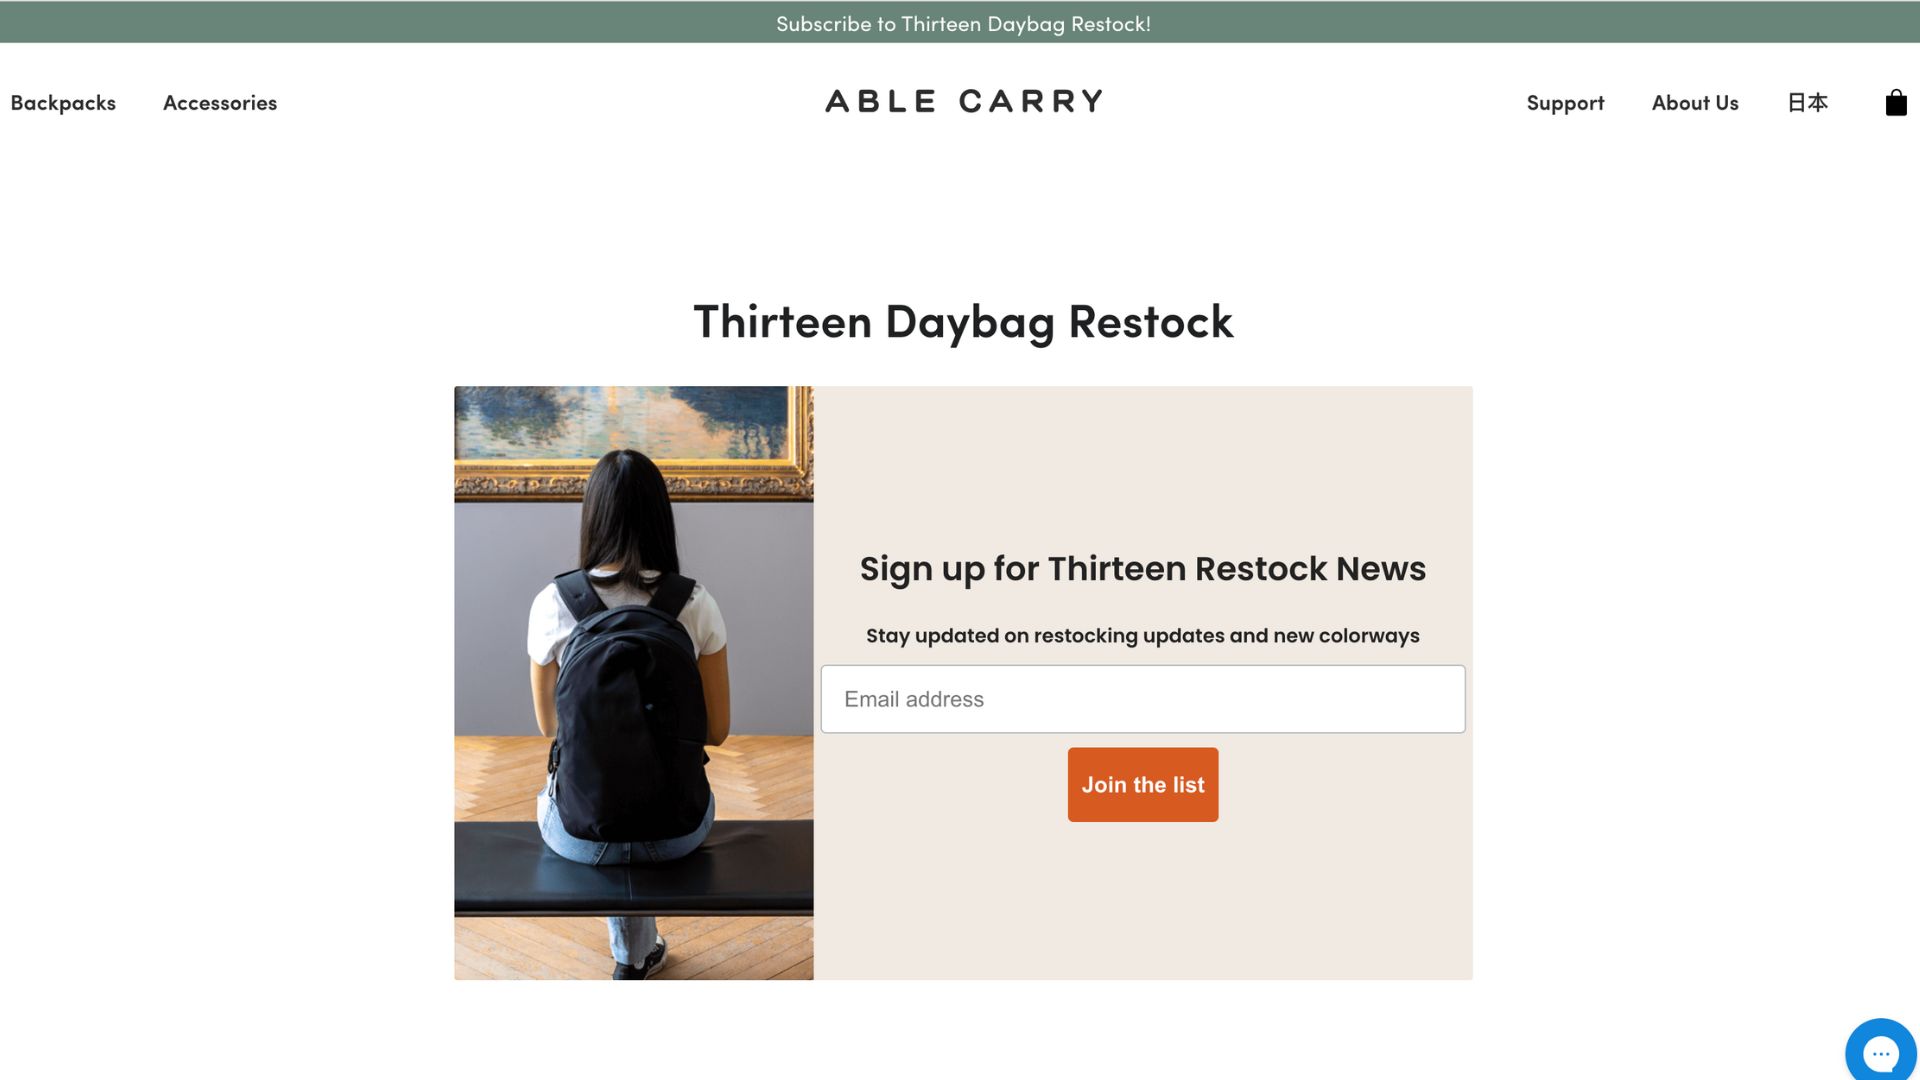 Example of a newsletter signup form on ablecarry.com